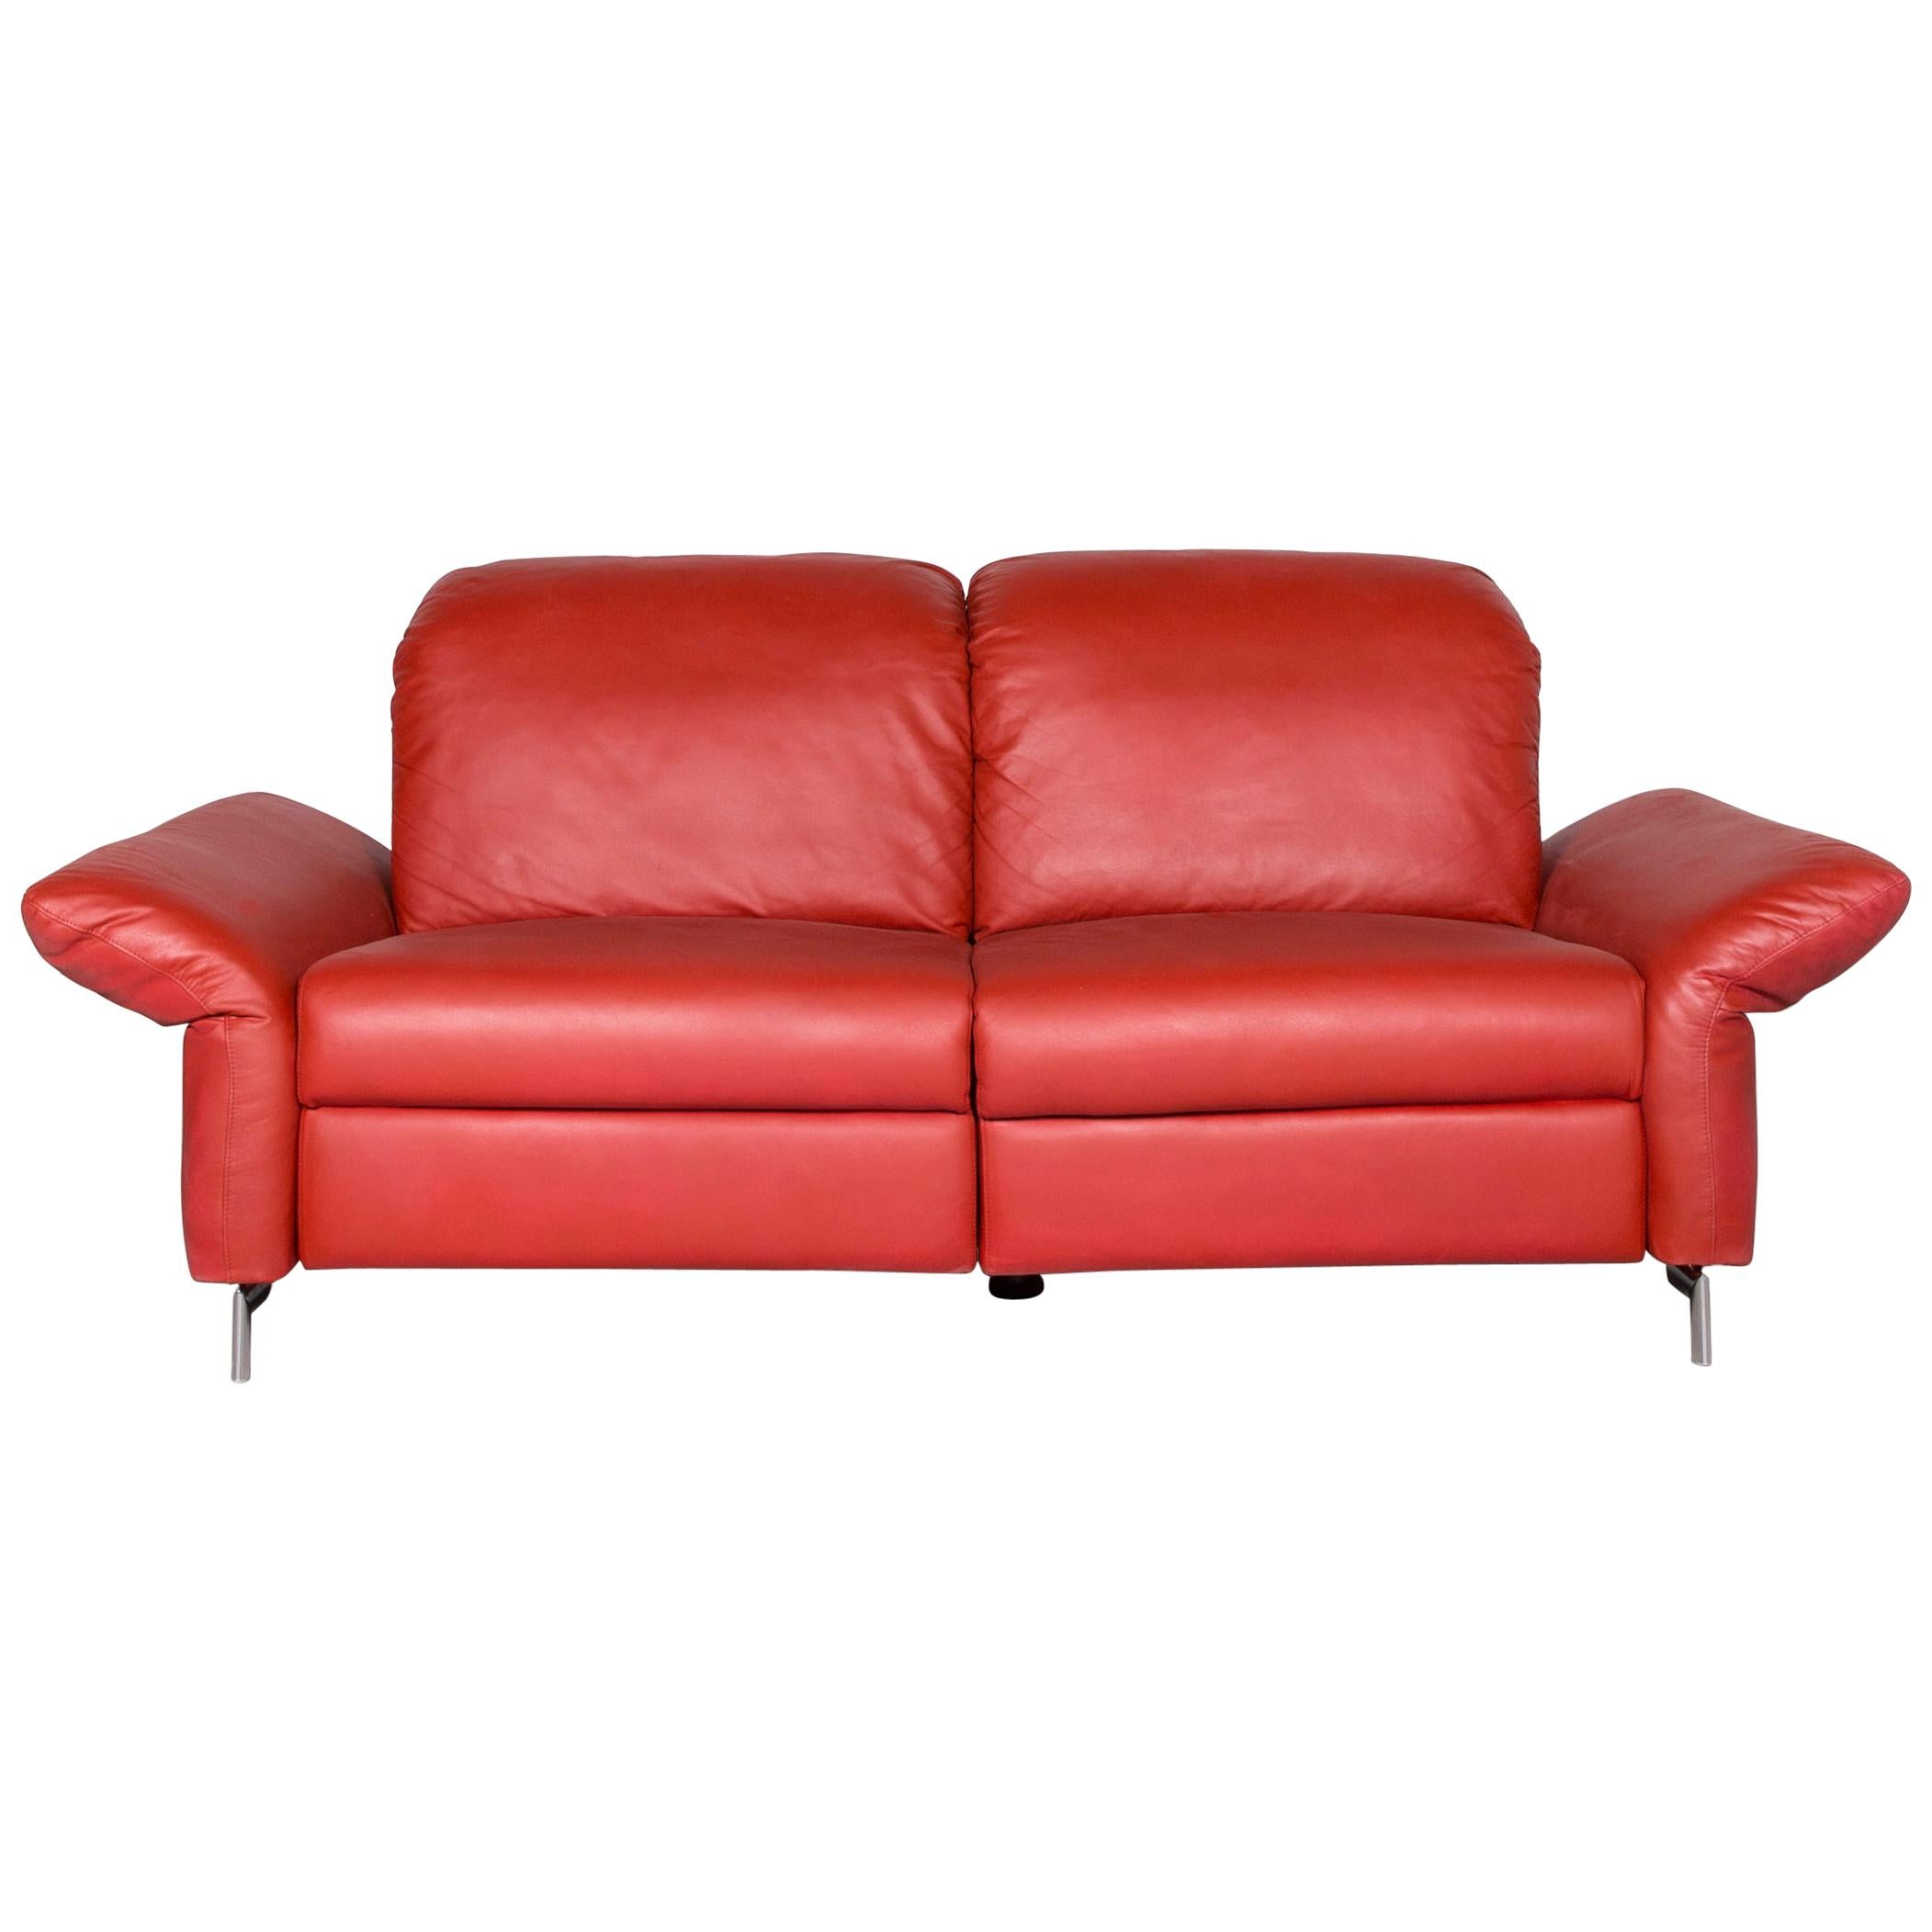 Willi Schillig Siena Designer Leather Sofa Red Real Leather Dreisityer Couch For Sale